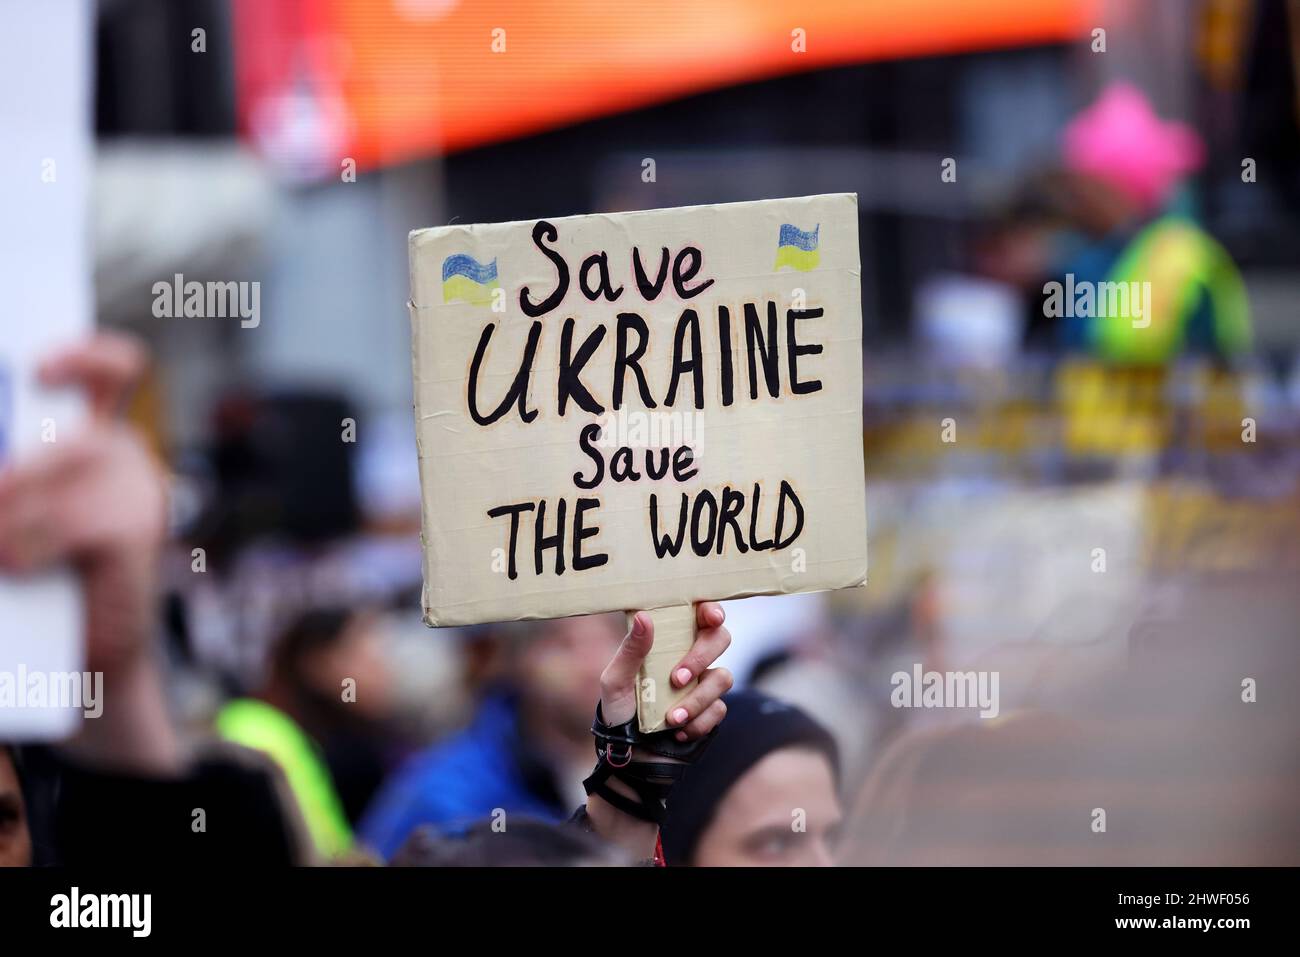 New York, USA. New York City, New York, Unites States: Demonstrators protesting Russia's invasion of, Ukraine. 5th Mar, 2022. at a rally in New York City's Times Square this afternoon. Credit: Adam Stoltman/Alamy Live News Stock Photo